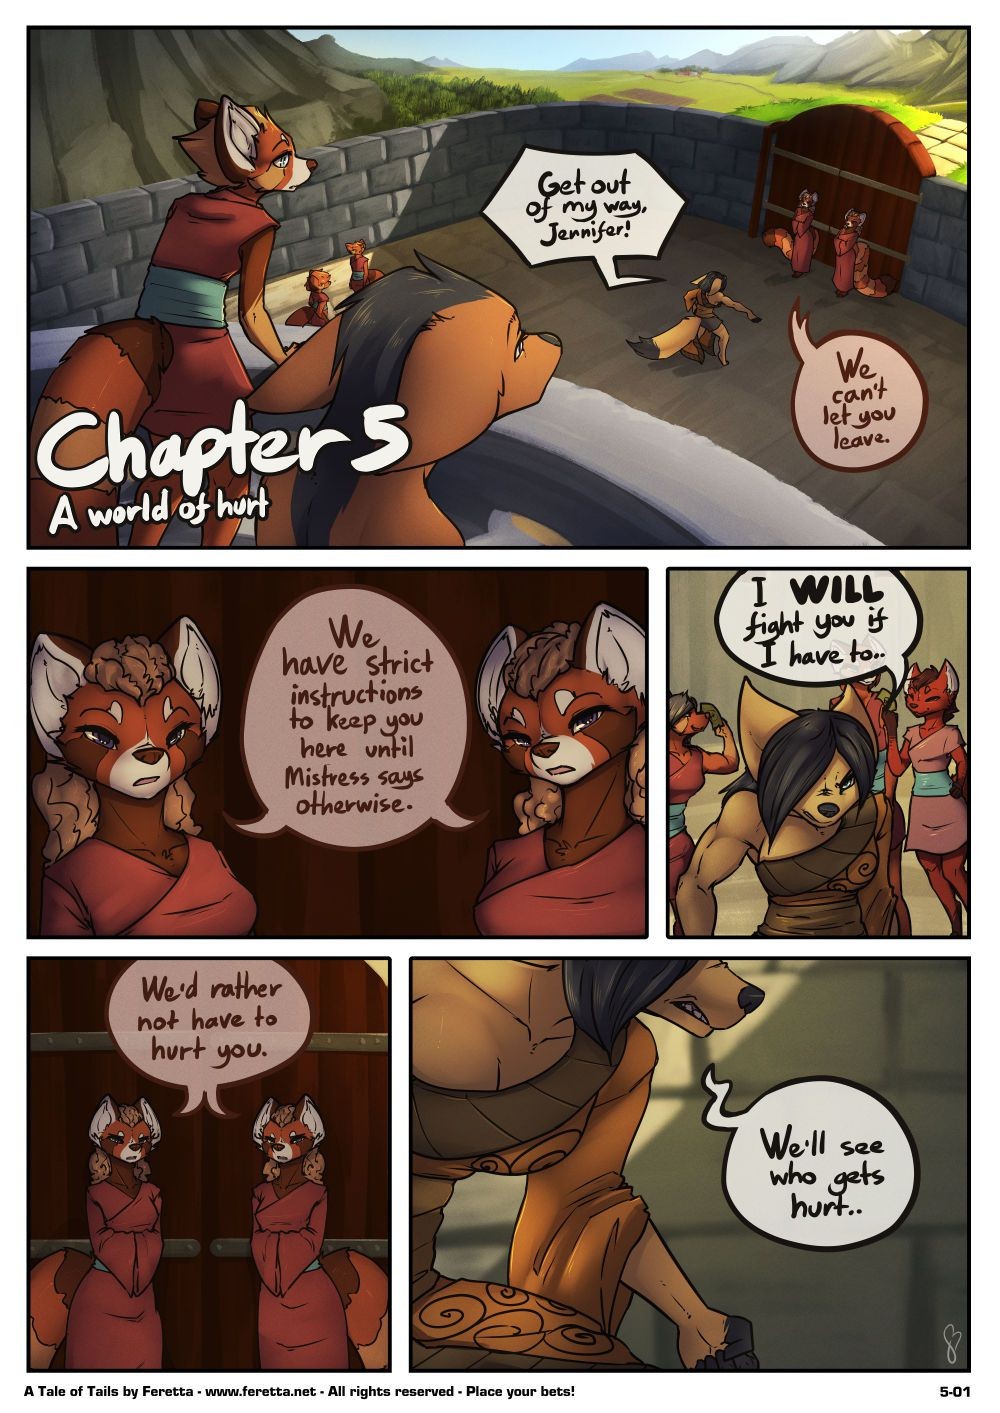 Masturbandose [Feretta] A Tale Of Tails: Chapter 5 - A World Of Hurt (ongoing) Culona